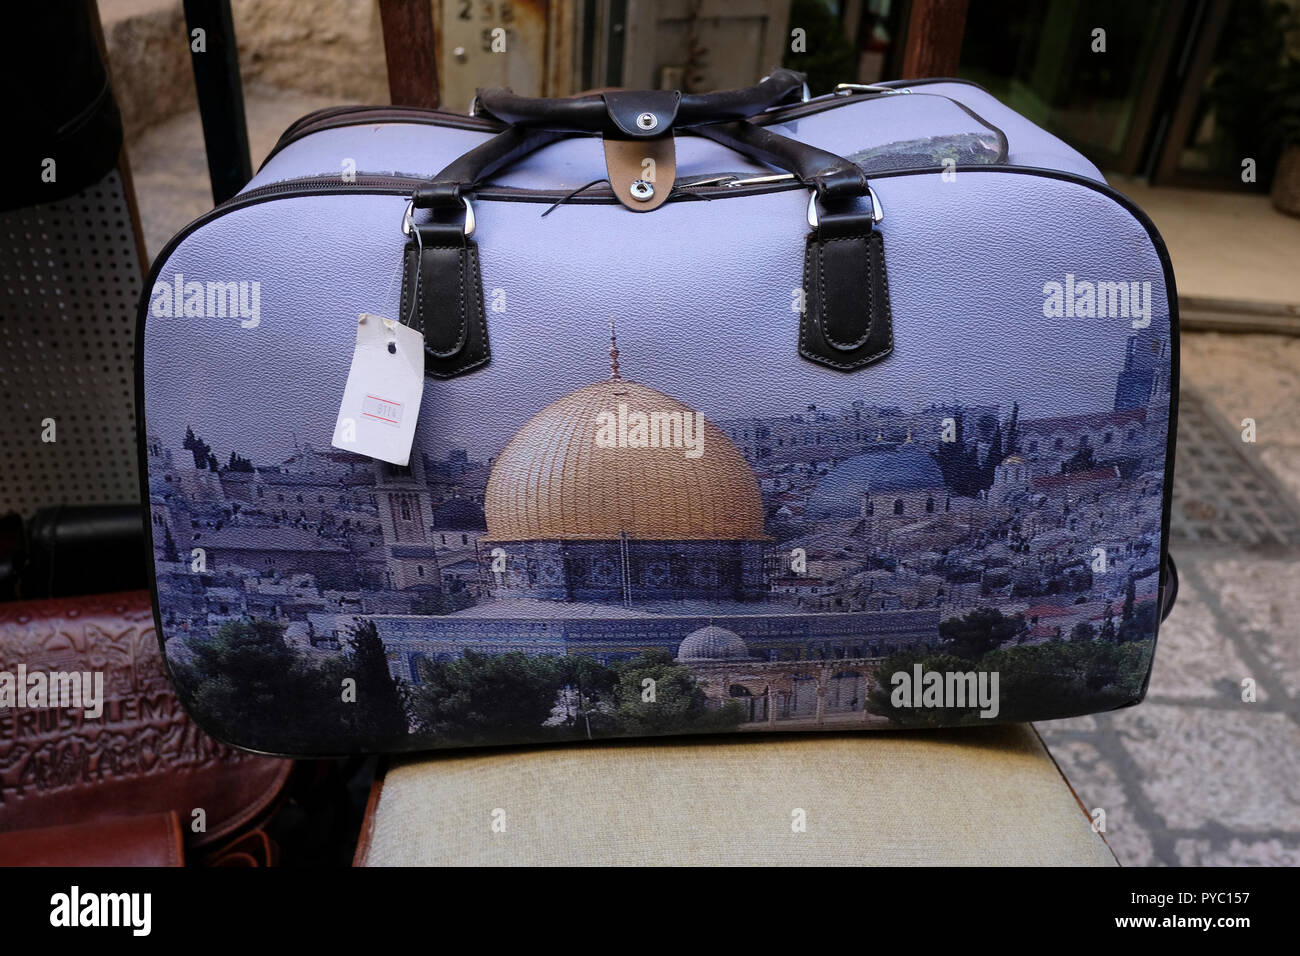 A bag features the Islamic shrine Dome of the Rock Jerusalem's iconic landmark  for sale in a souvenir shop in the Muslim Quarter in the old city East Jerusalem Israel Stock Photo